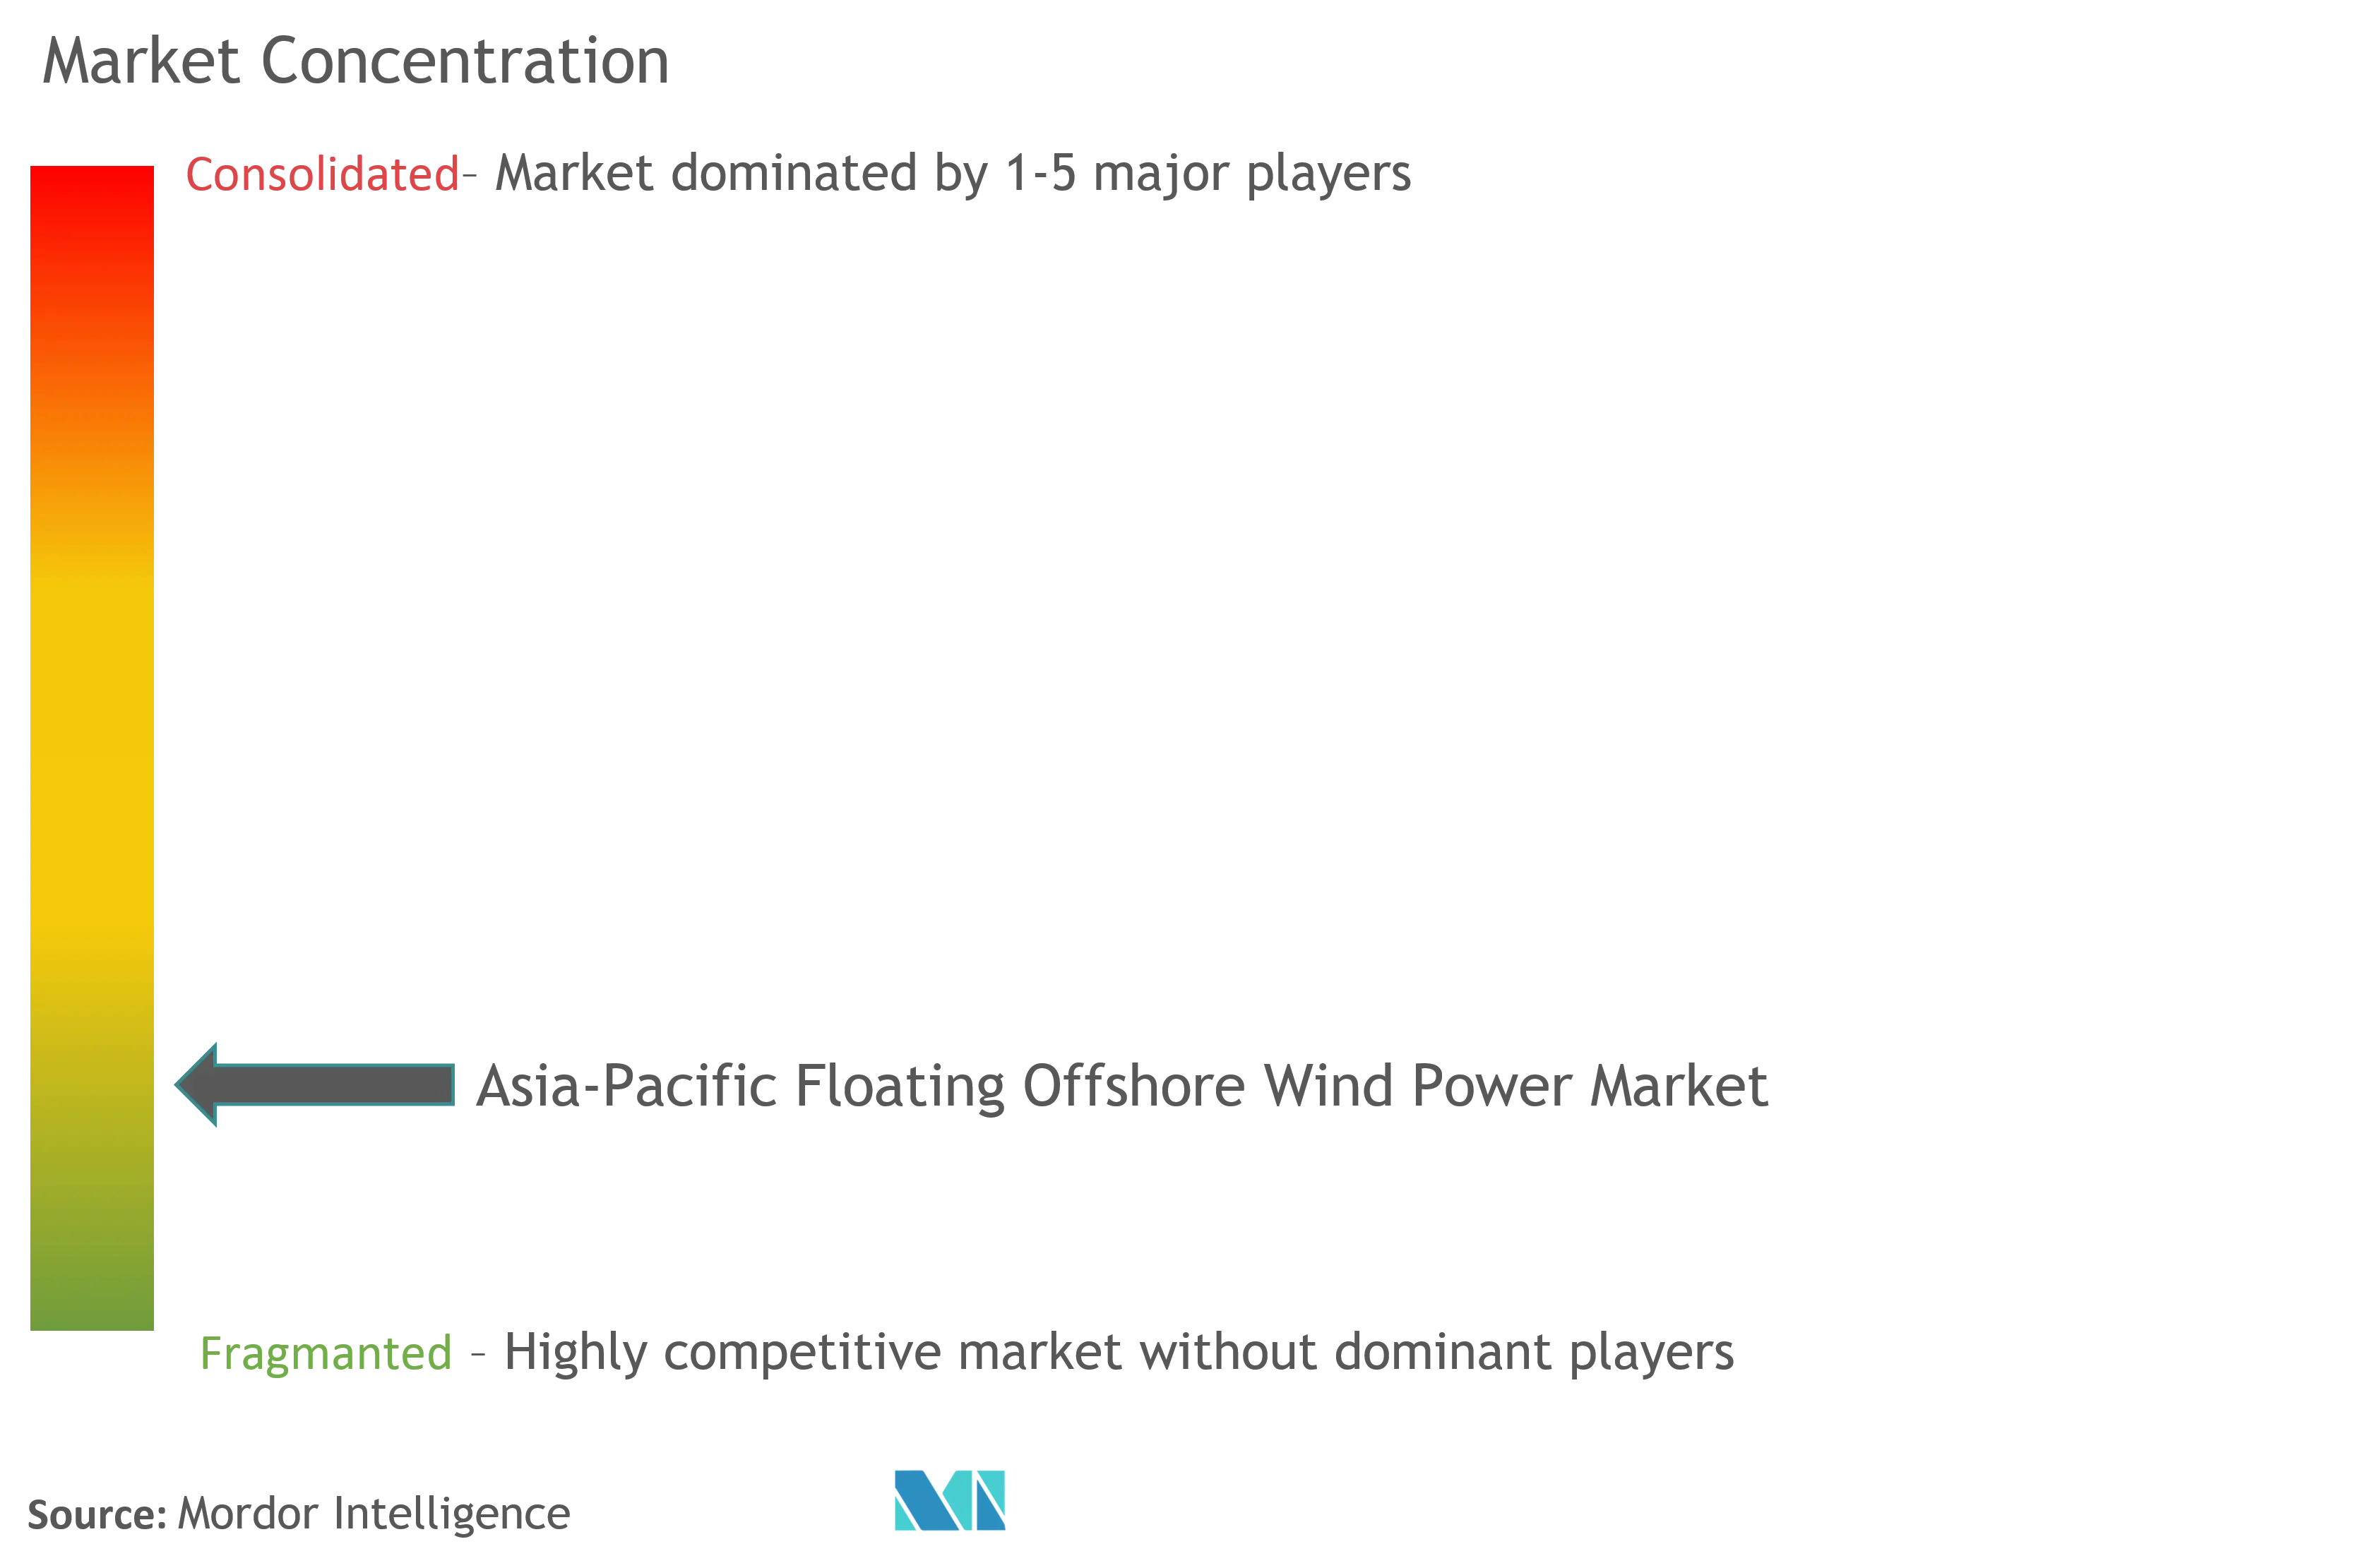 APAC Floating Offshore Wind Power Market Concentration